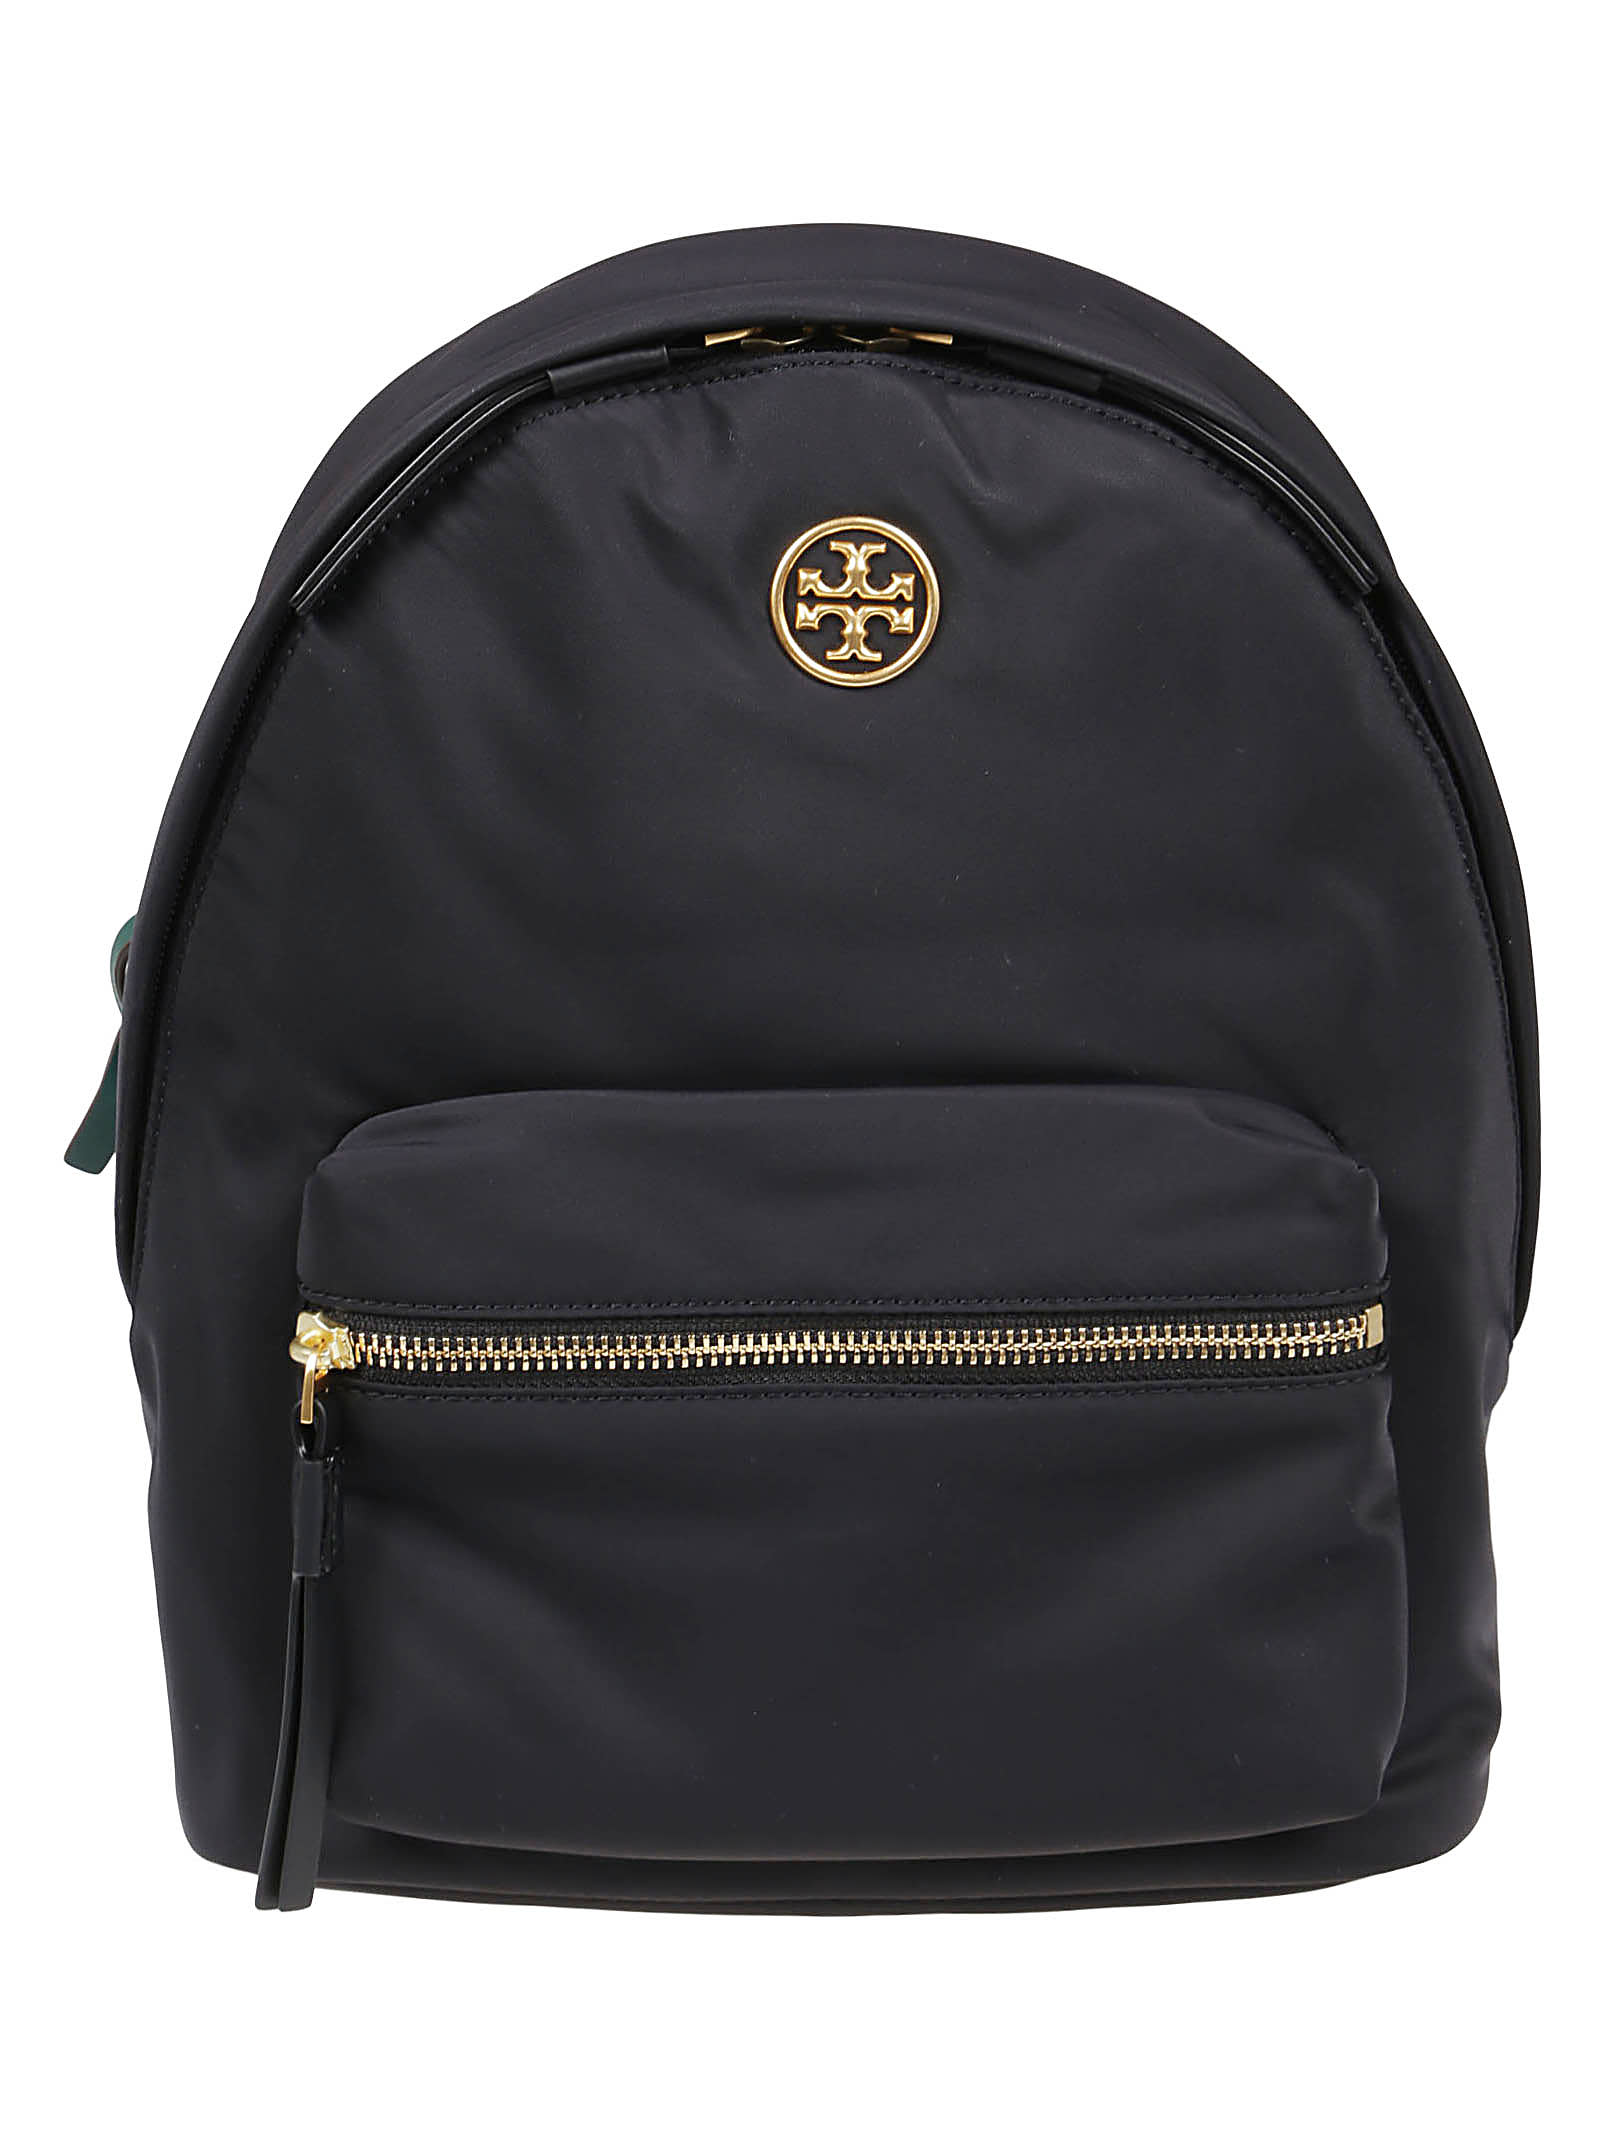 Tory Burch Piper Small Zip Backpack